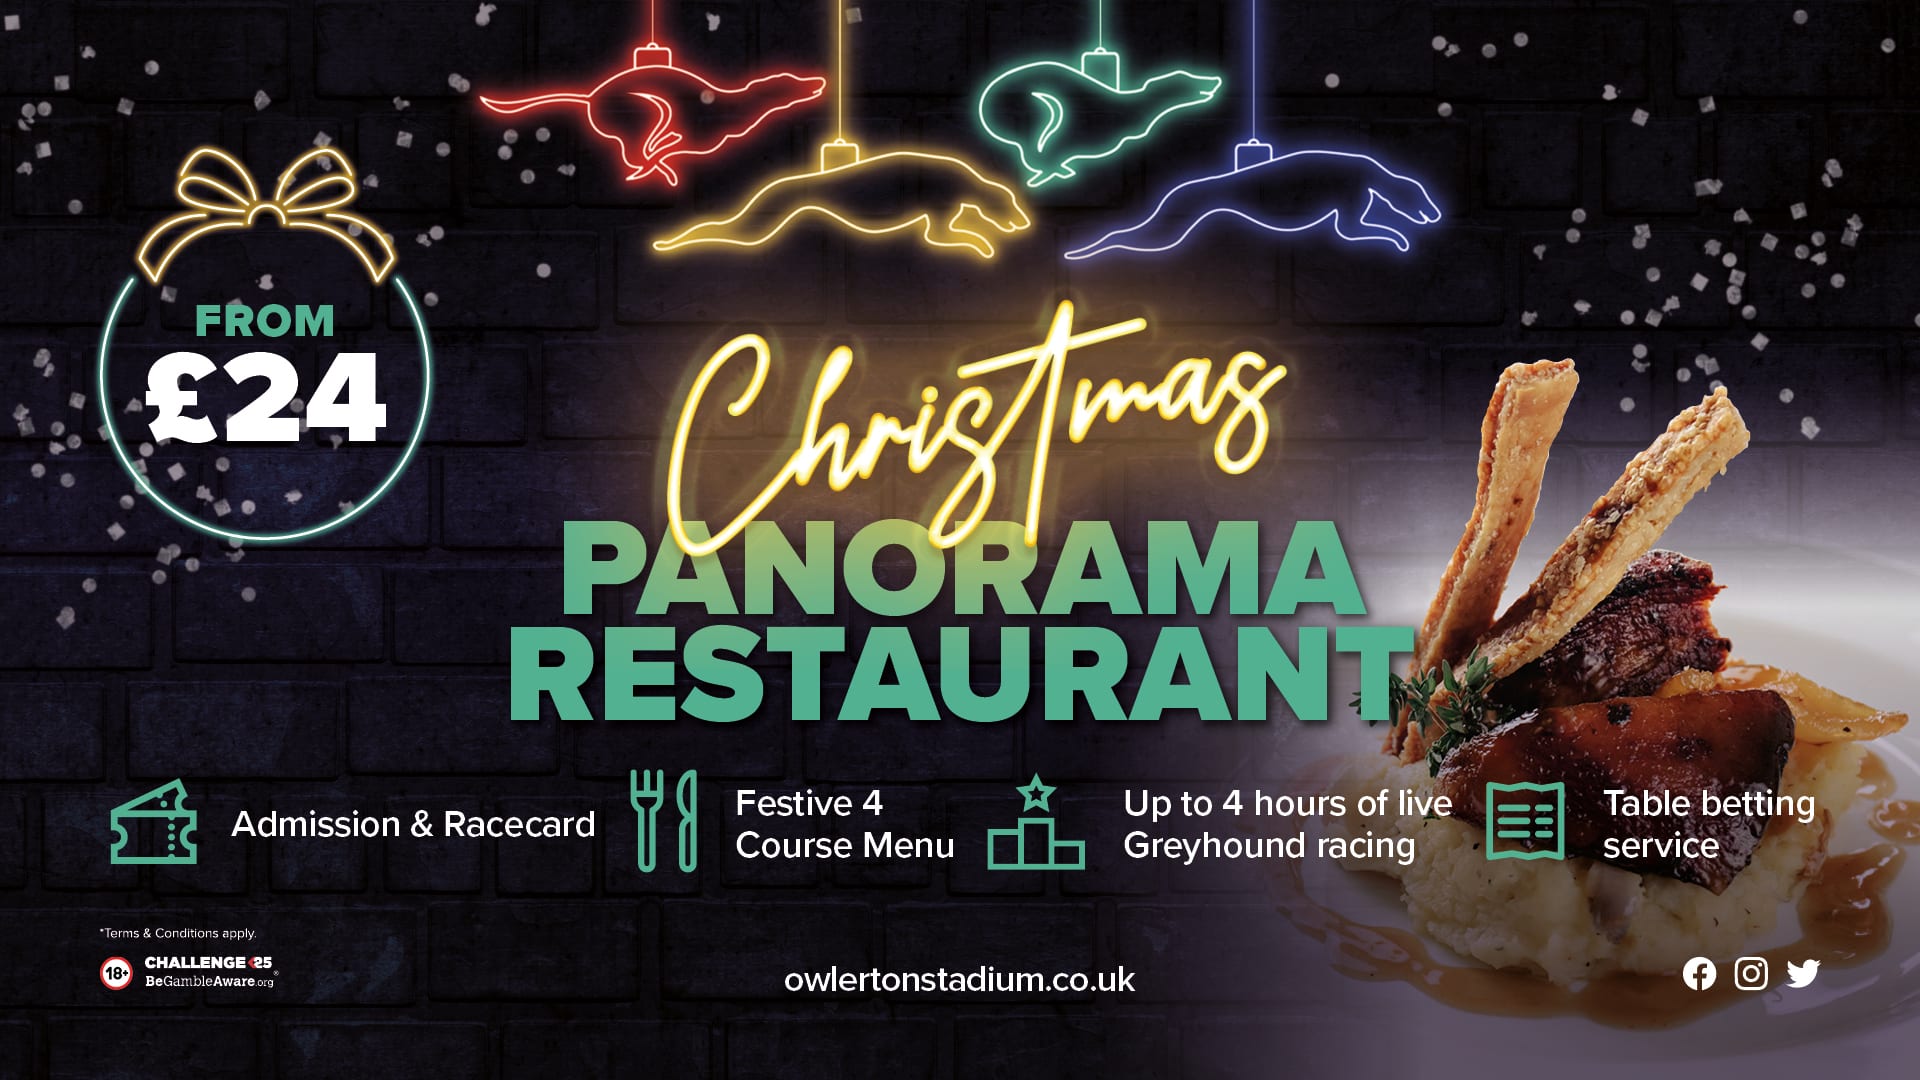 Greyhounds & Garlands: Why Owlerton Stadium is the Best Christmas Night Out in Sheffield! - Owlerton Stadium